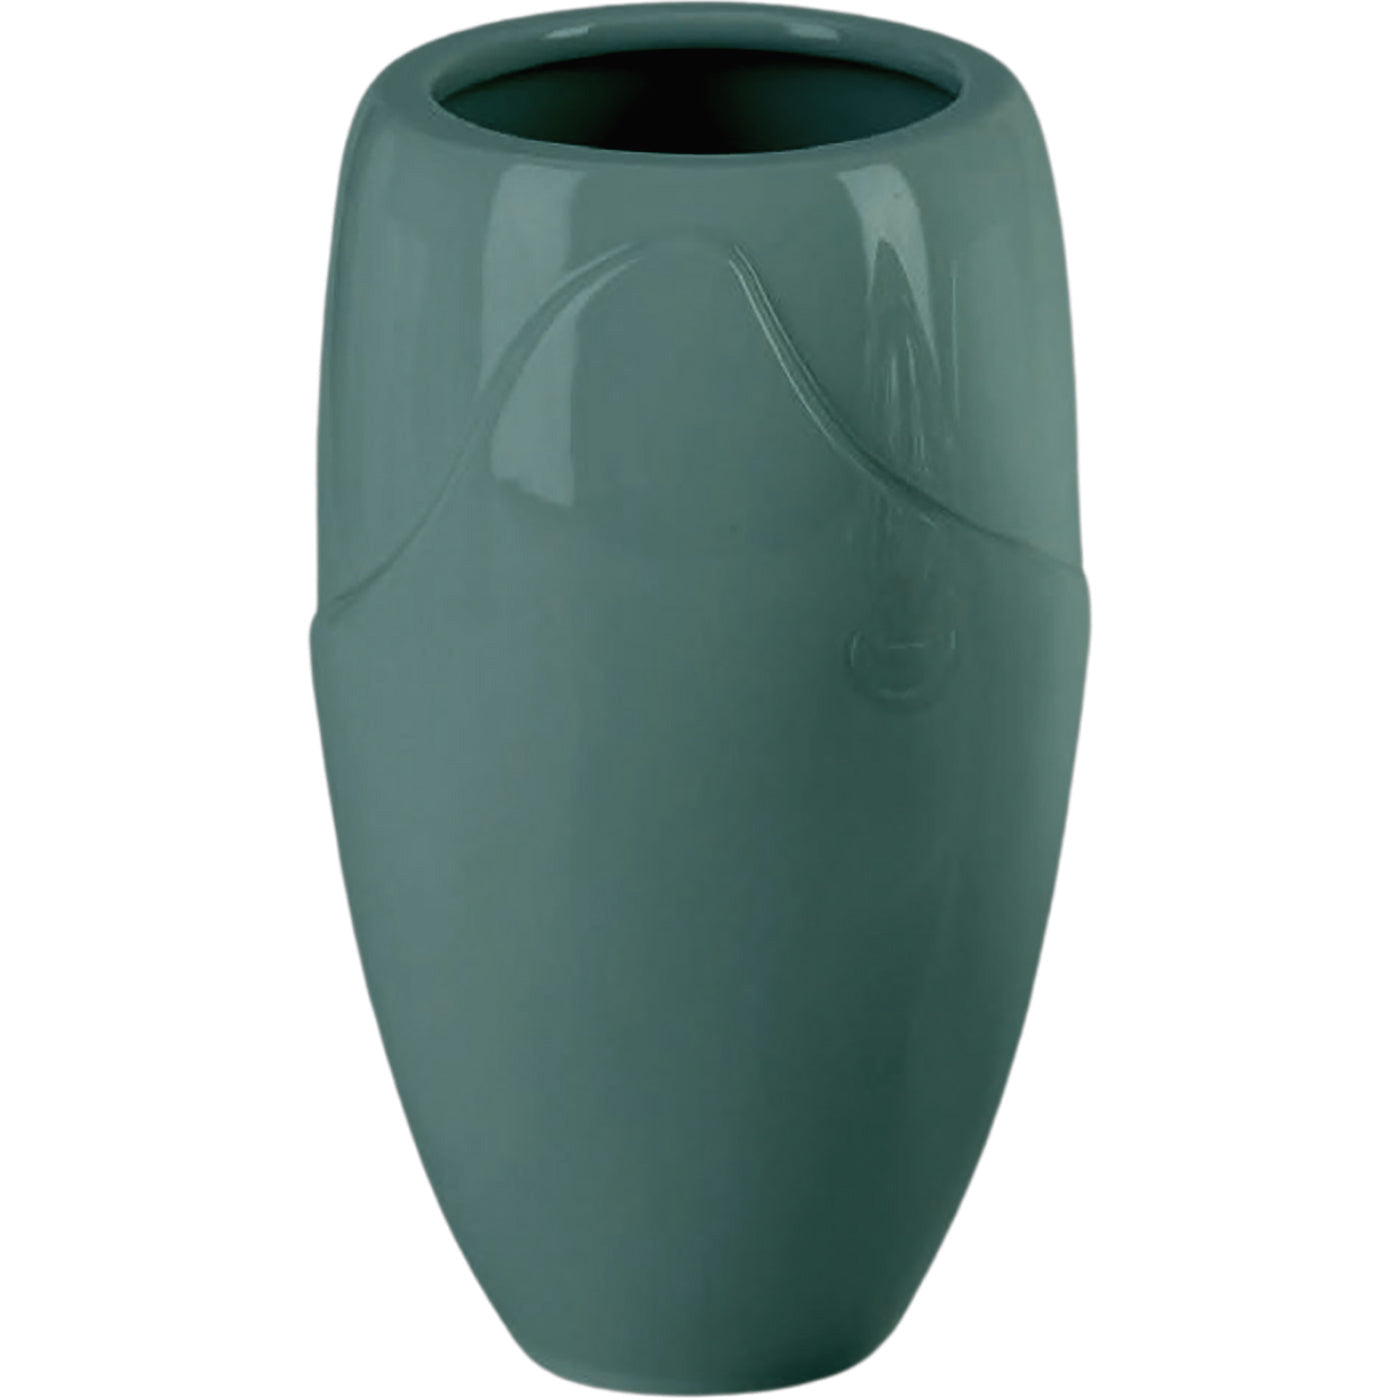 Grave vase Onda green 21x13cm - 8.3x5.1in In green porcelain, ground attached ON168P/V